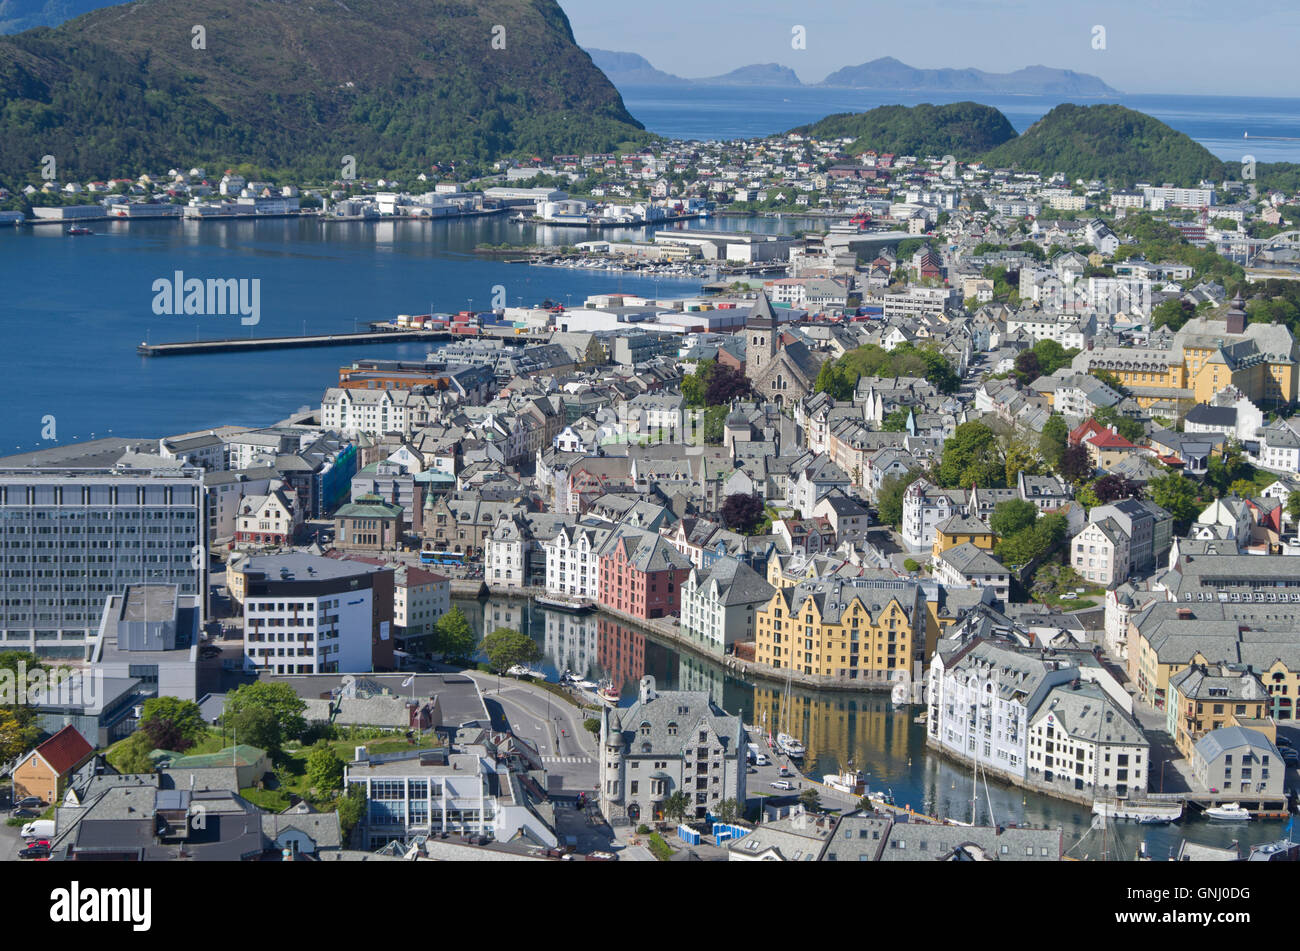 From a viewpoint high above the town, an aerial view of Alesund, Norway Stock Photo